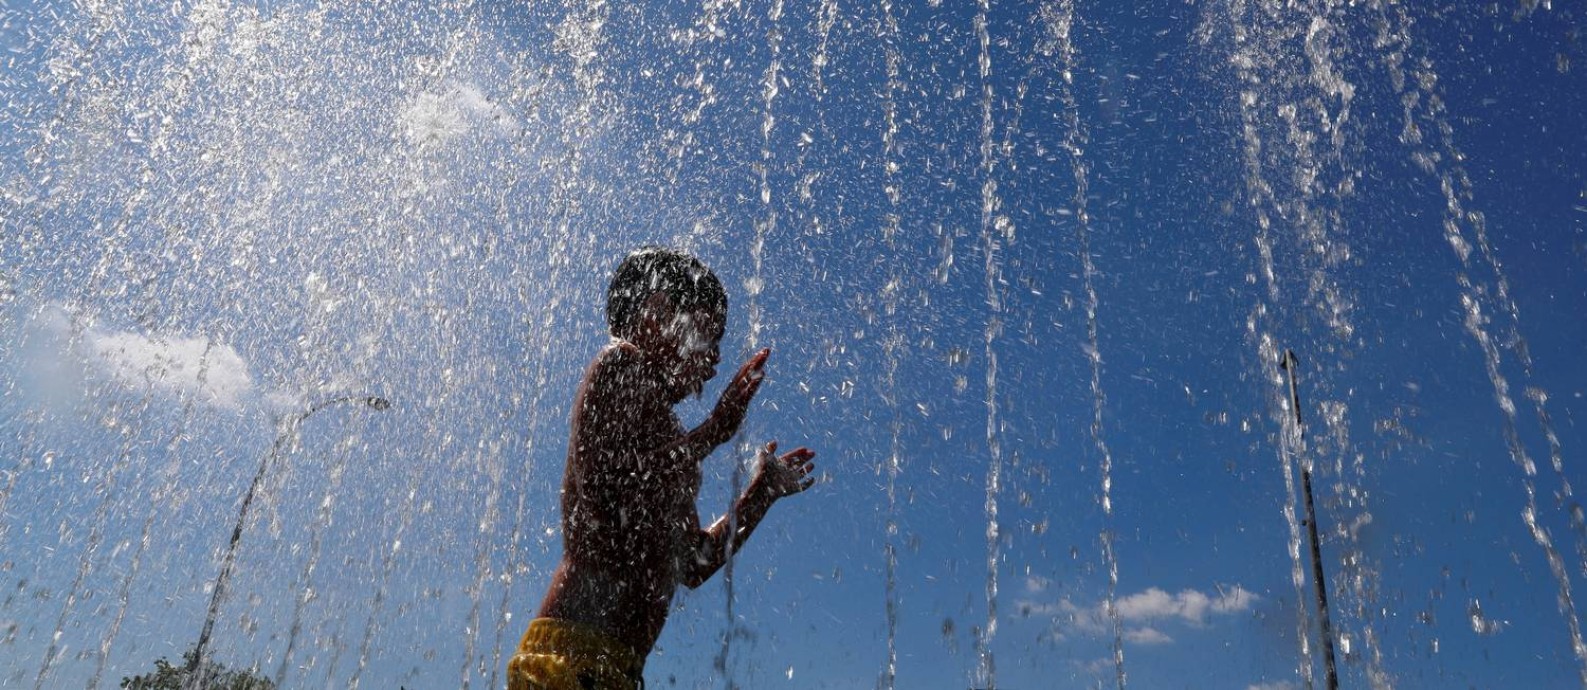 A child refreshes in a fountain next to the Chancellery during a hot summer day in Berlin, Germany, July 23, 2019. REUTERS/Fabrizio Bensch Foto: FABRIZIO BENSCH / REUTERS